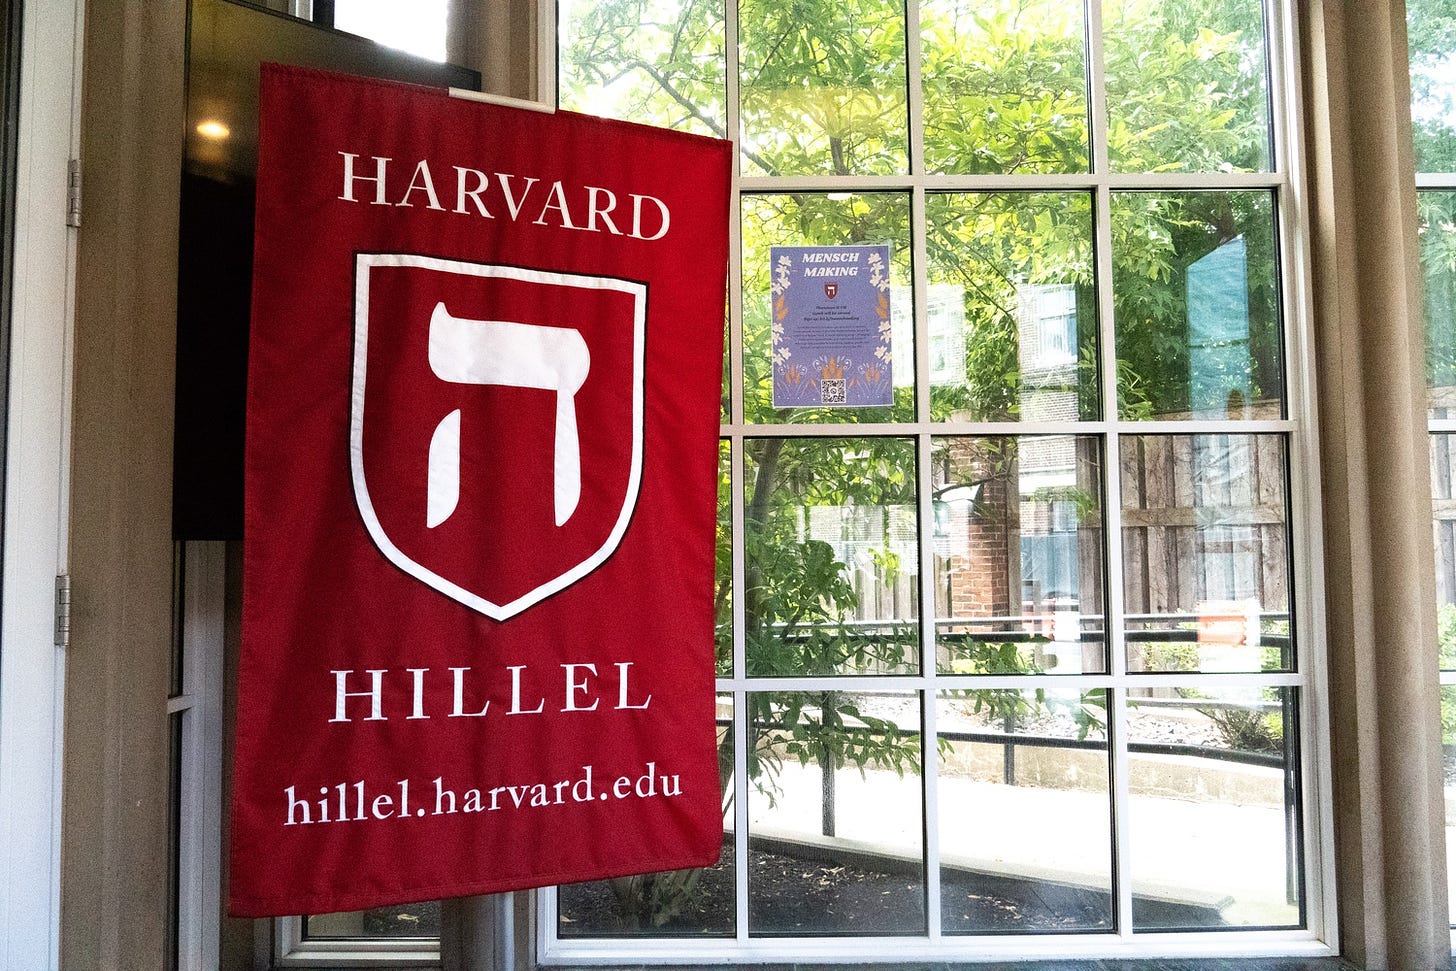 Harvard Hillel is the University's Jewish Center. Bernie Steinberg was executive director from 1993 to 2010.